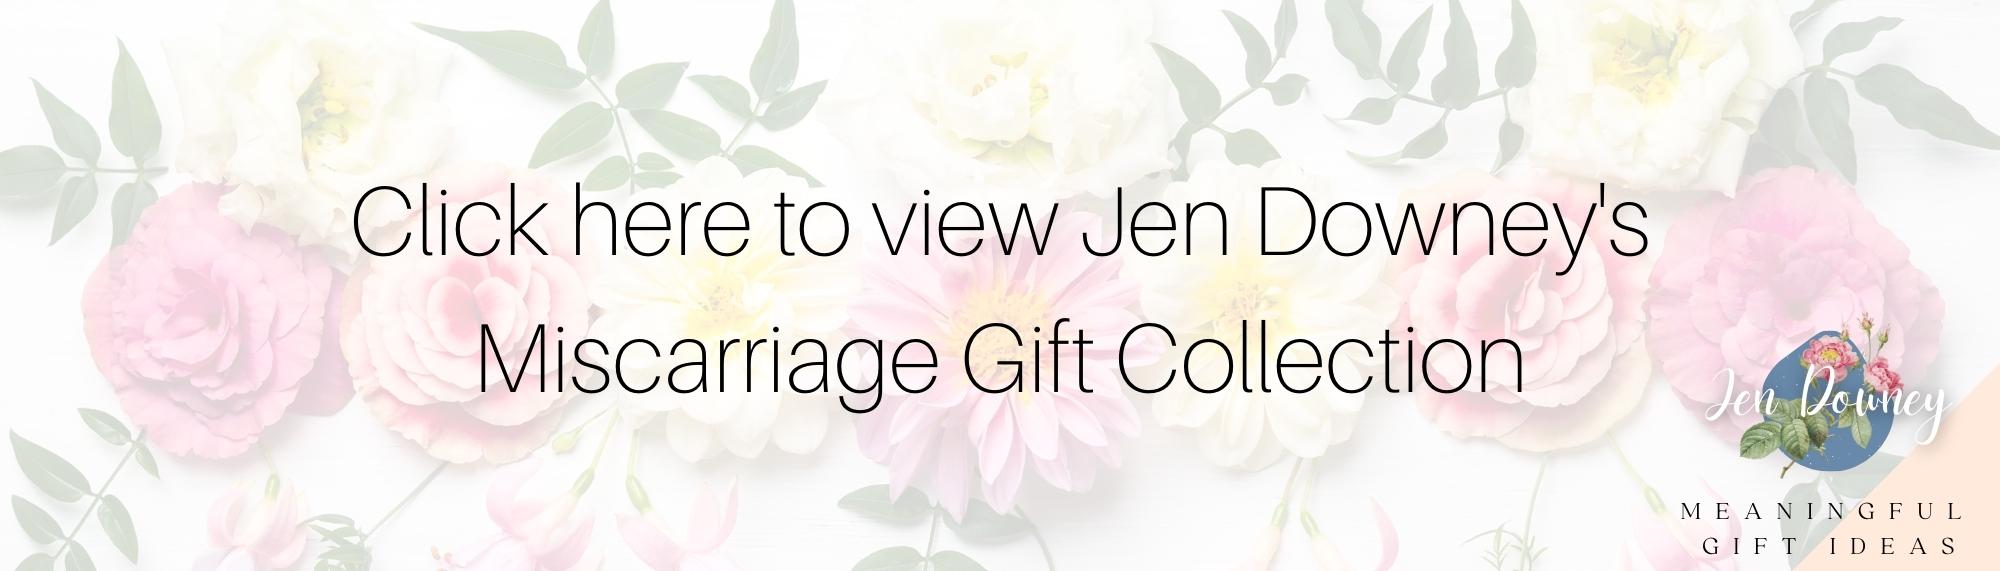 meaningful miscarriage gift ideas